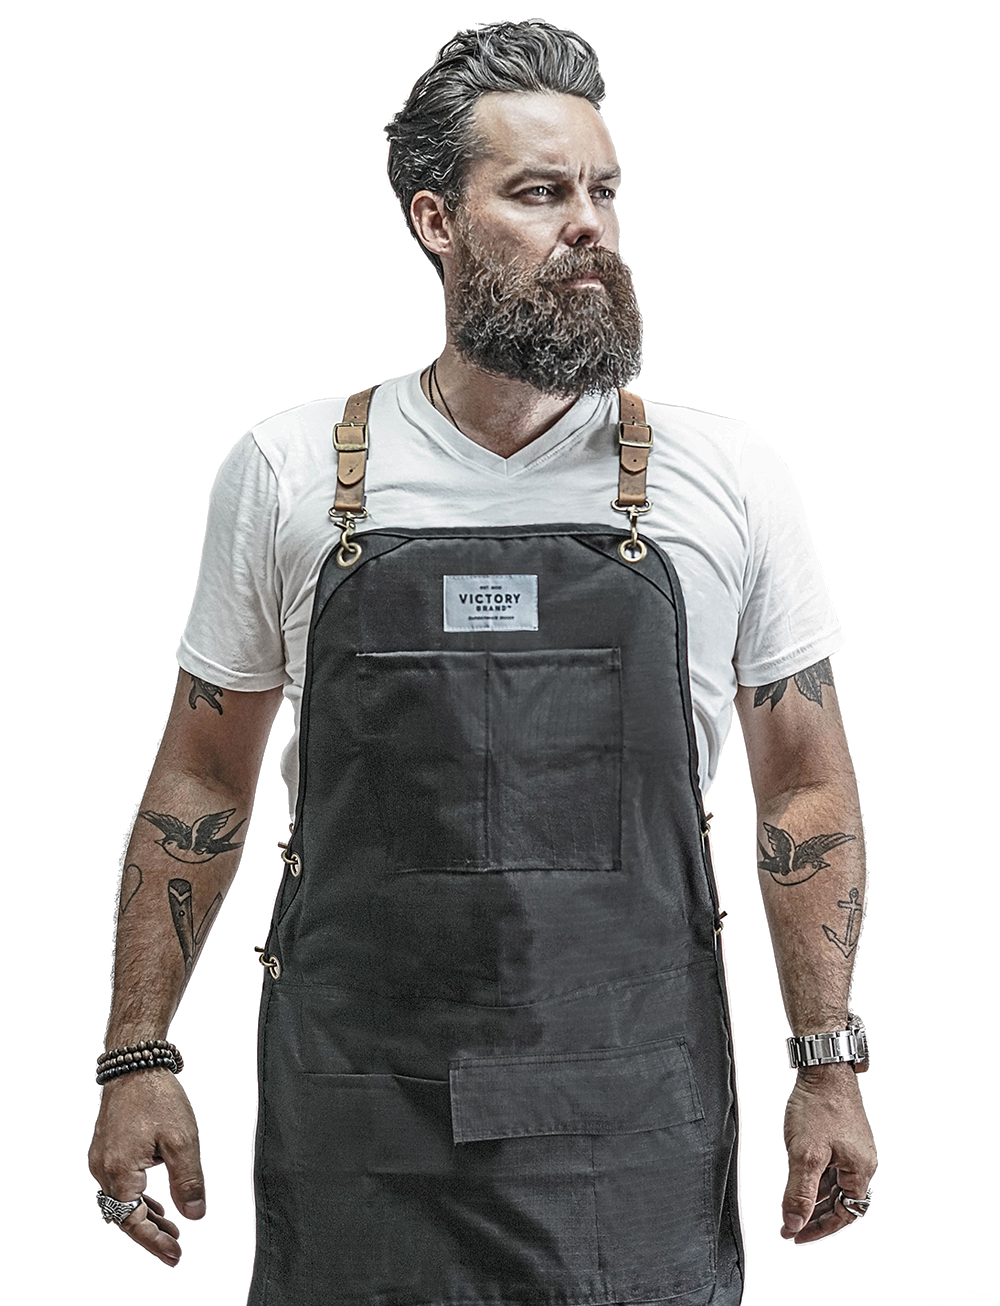 Tactical Apron for barbers and hairstylists by Victory Barber & Brand